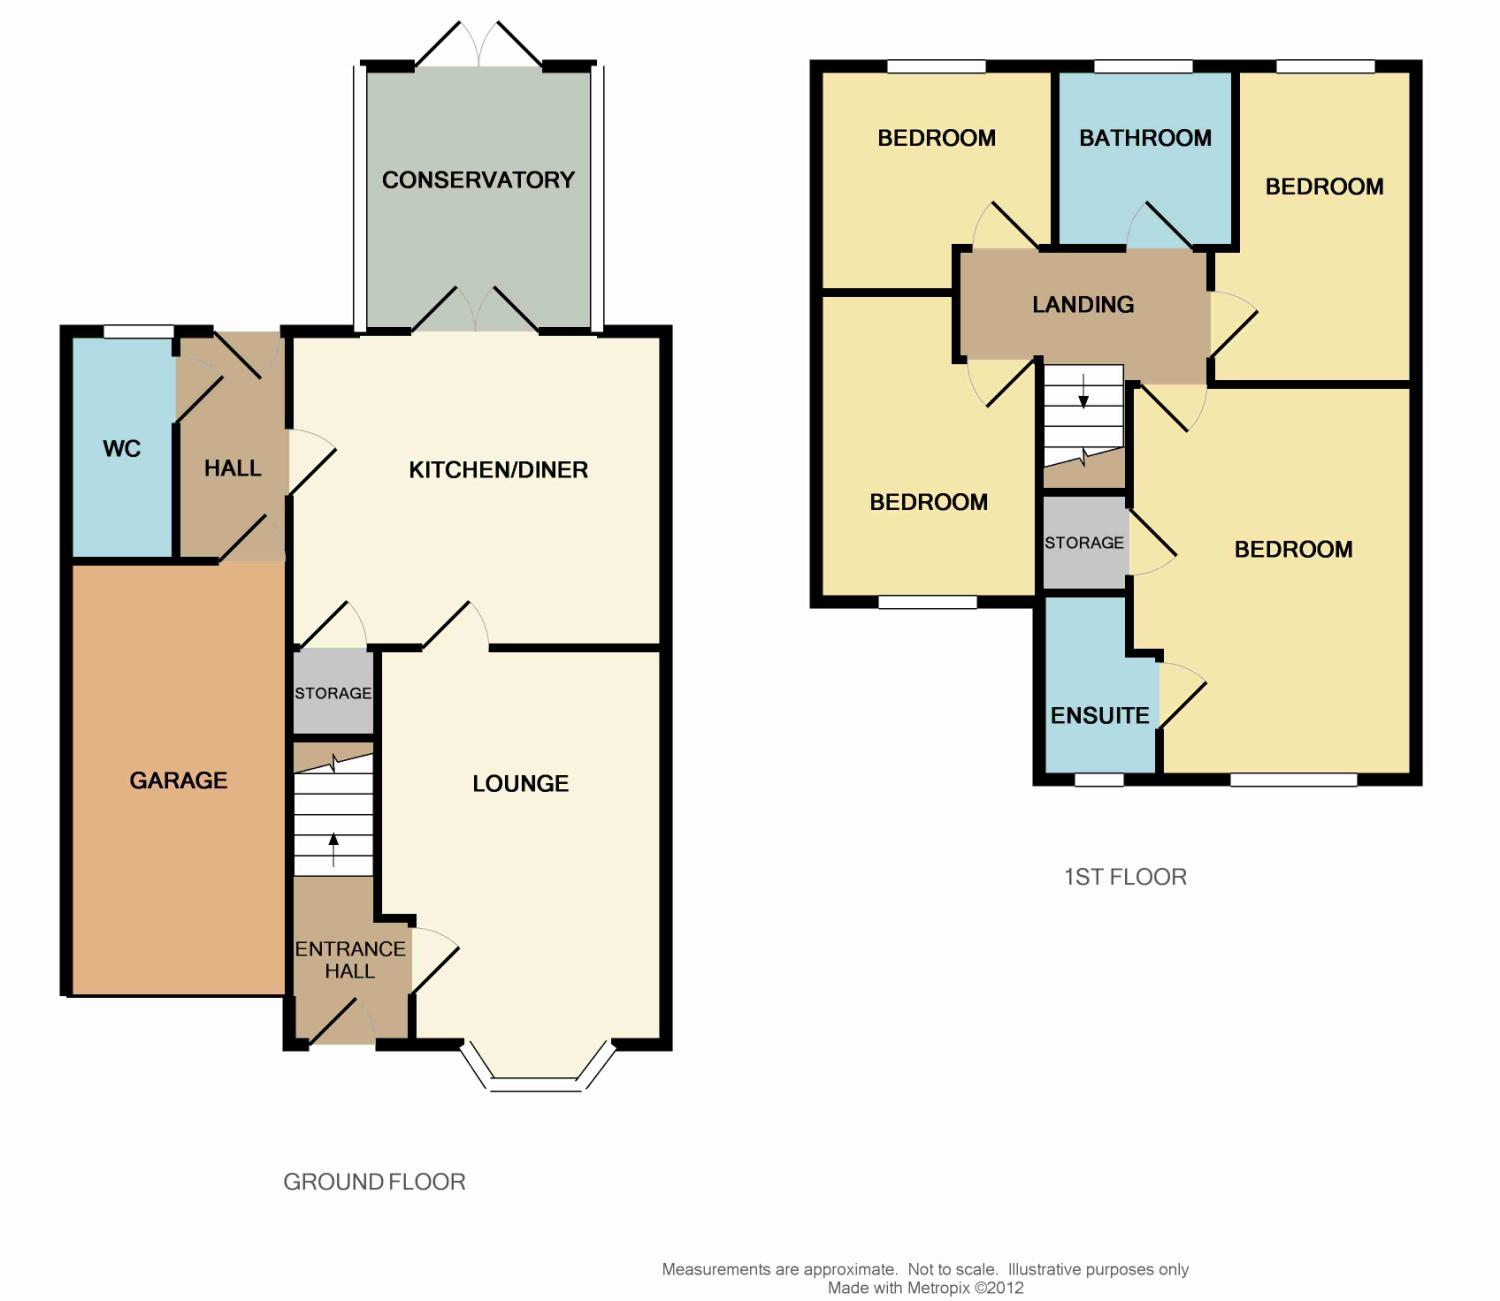 4 bed house to rent - Property floorplan